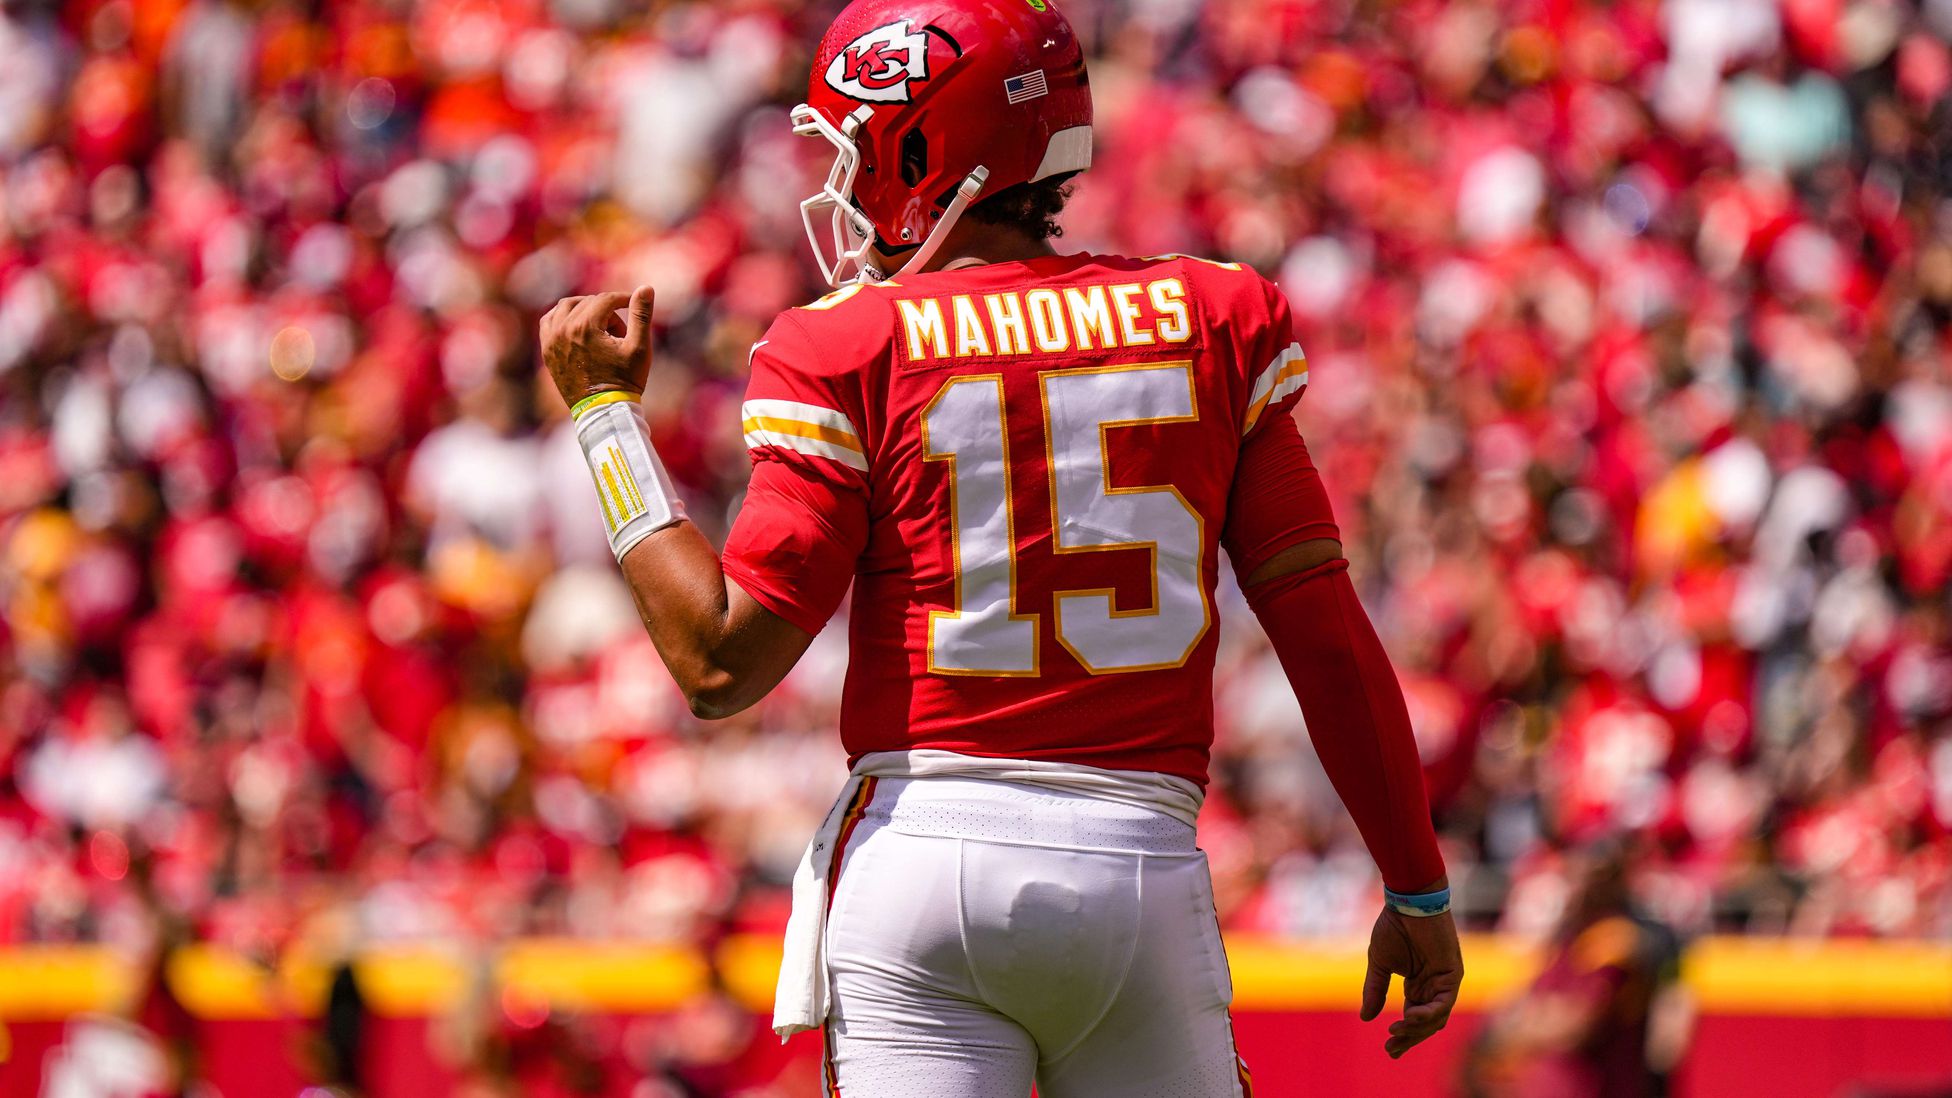 When will Patrick Mahomes skin be available on Fortnite and how can I get it?